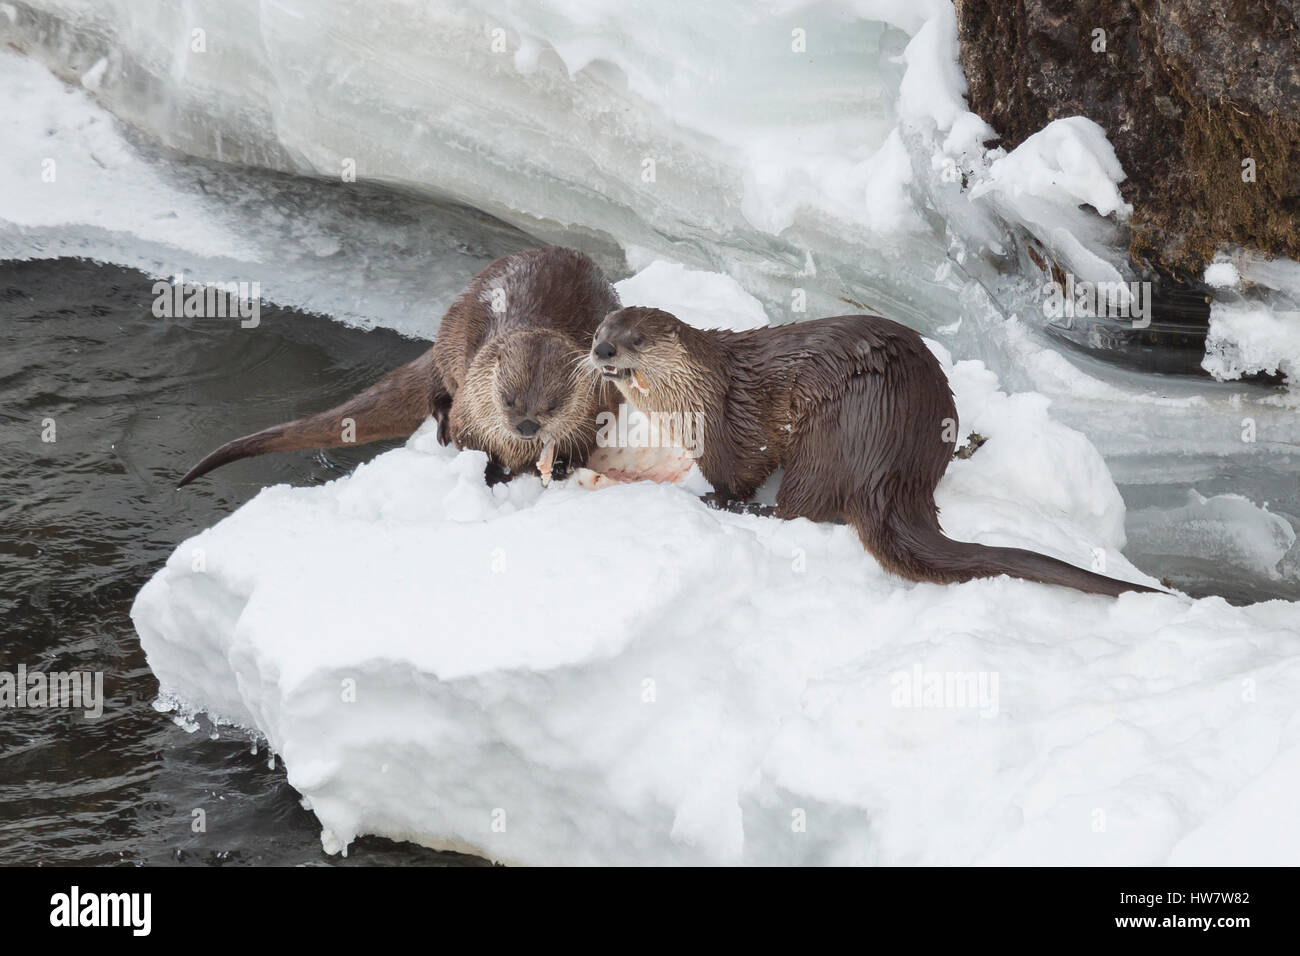 River otters feeding on trout in the Yellowstone River, Yellowstone National Park, Wyoming. Stock Photo